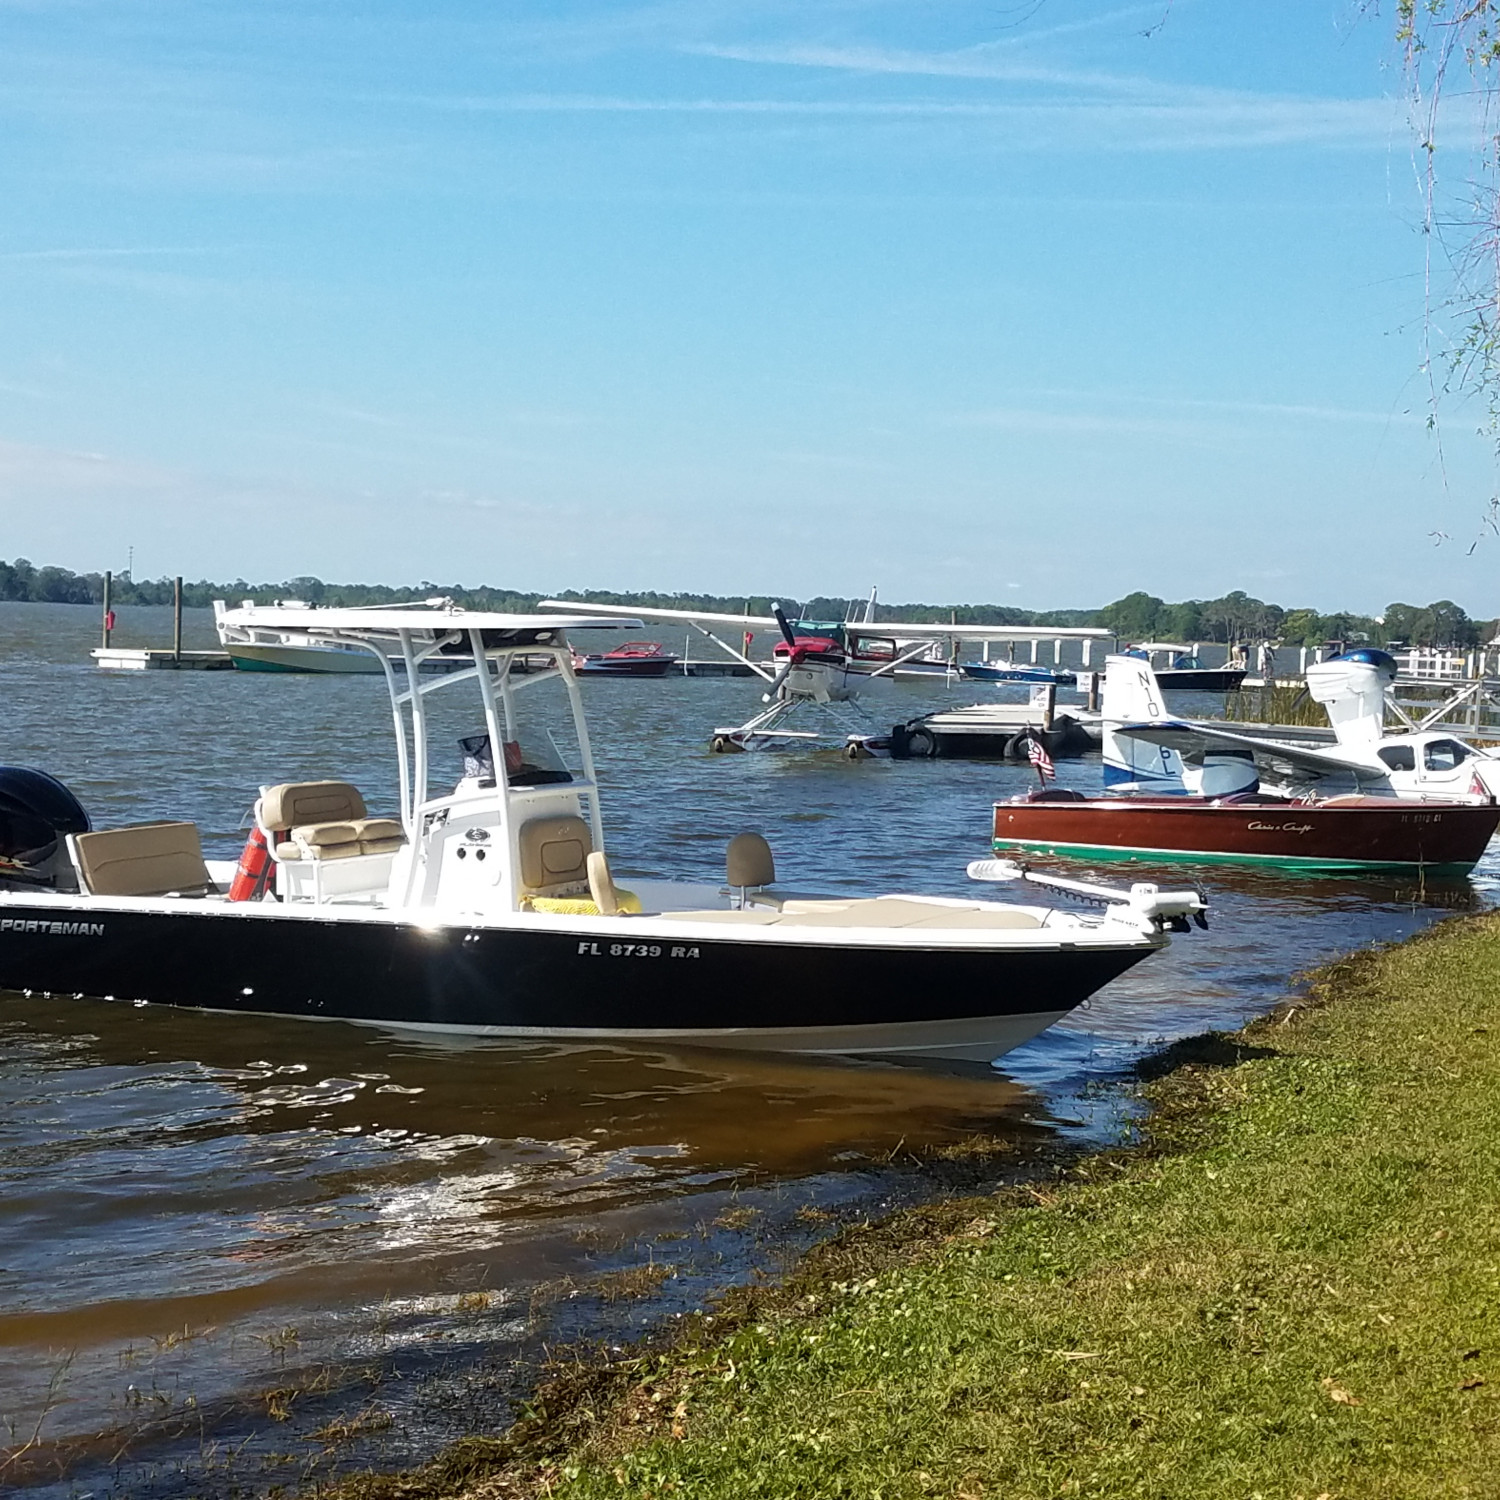 Great day at Sunnyland Antique Boat show in Tavares Fl.